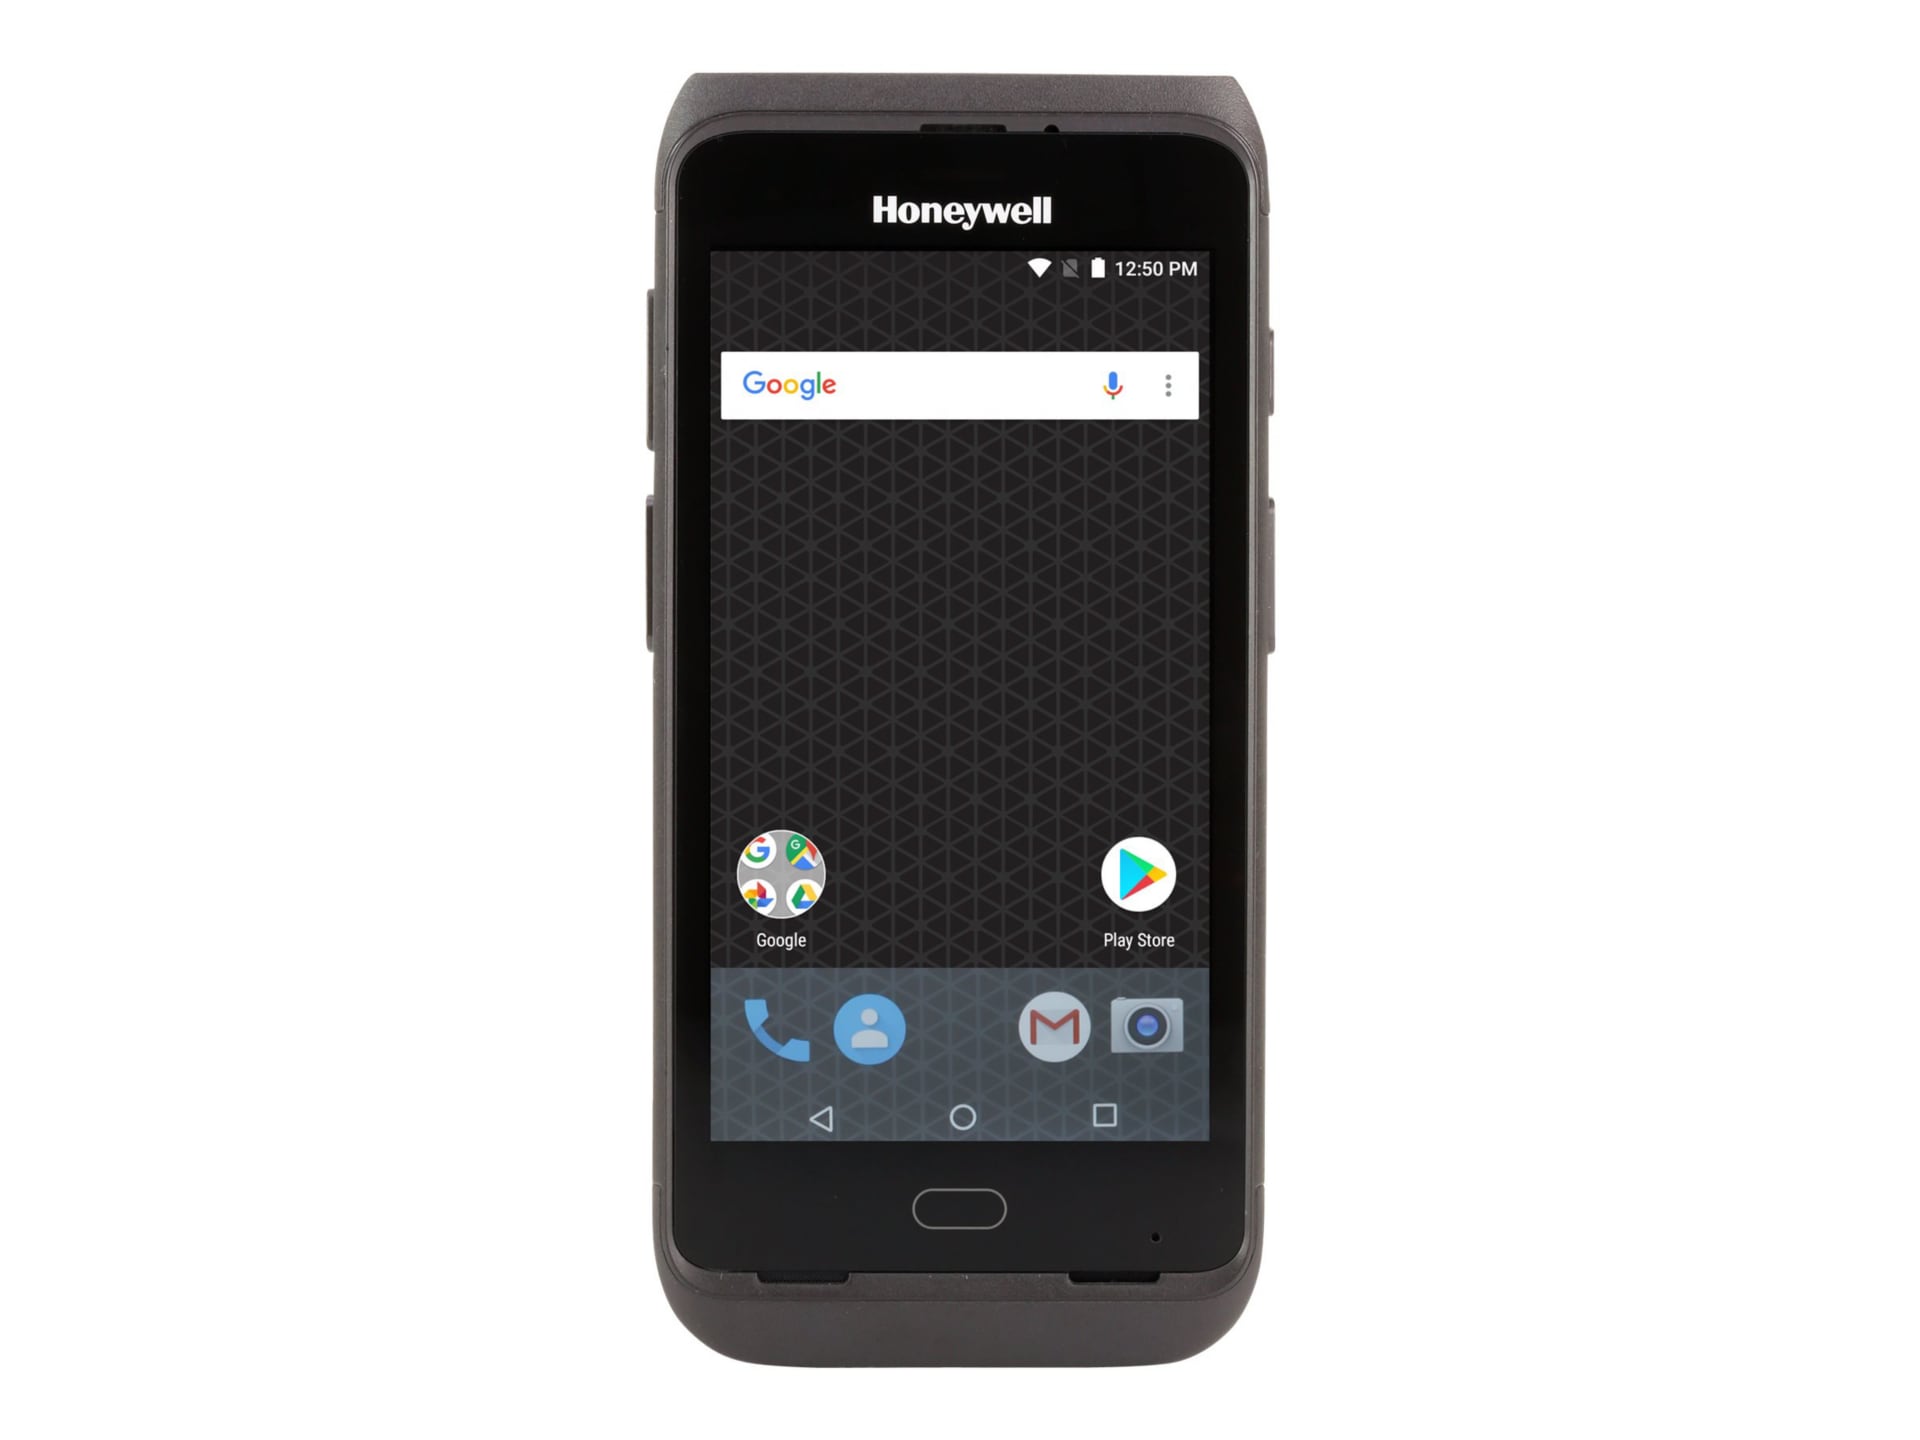 Honeywell Dolphin CT40 - data collection terminal - Android 7.1 (Nougat) -